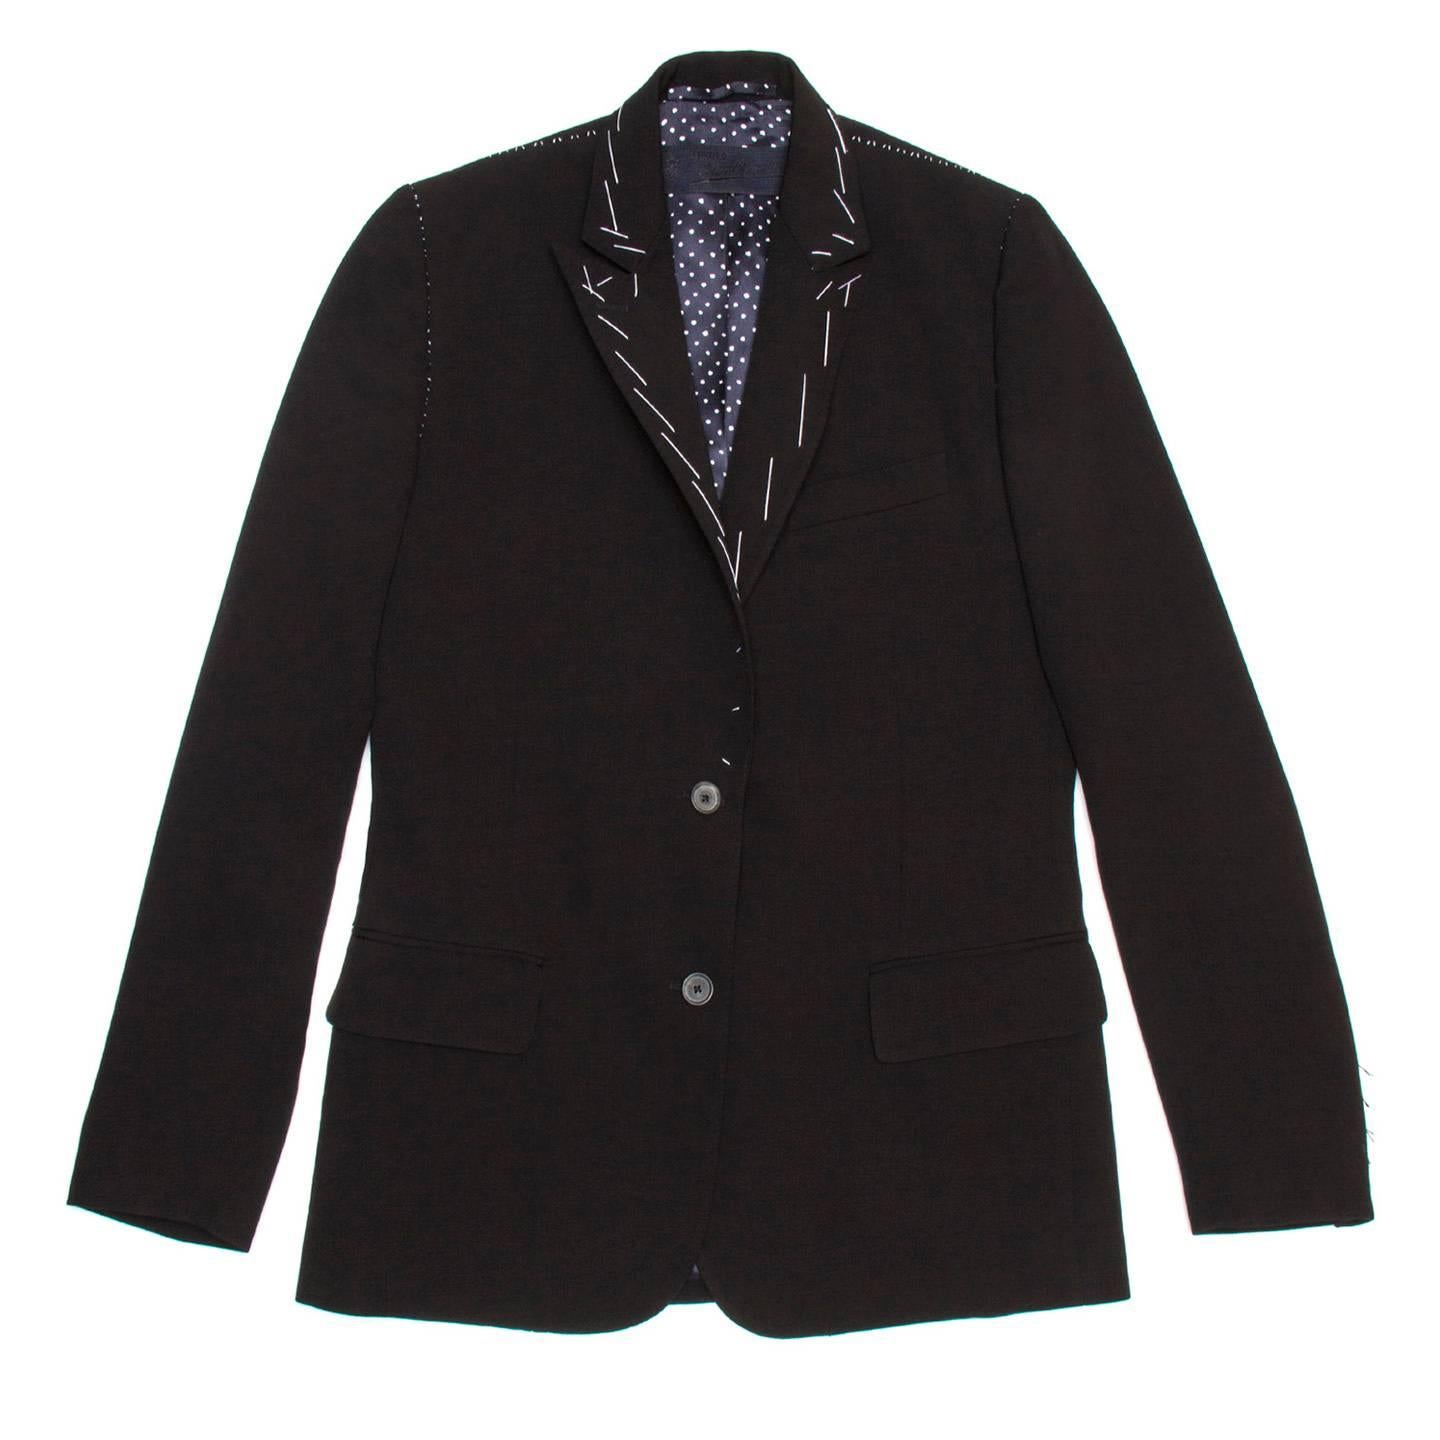 Black virgin wool blazer with small peaked lapel, 2 button closure, flap pockets and 2 back vents. The focal point and unique aspect of the jacket is the tailor white hand stitches on collar, lapel, vents and on shoulders and armholes seams. An